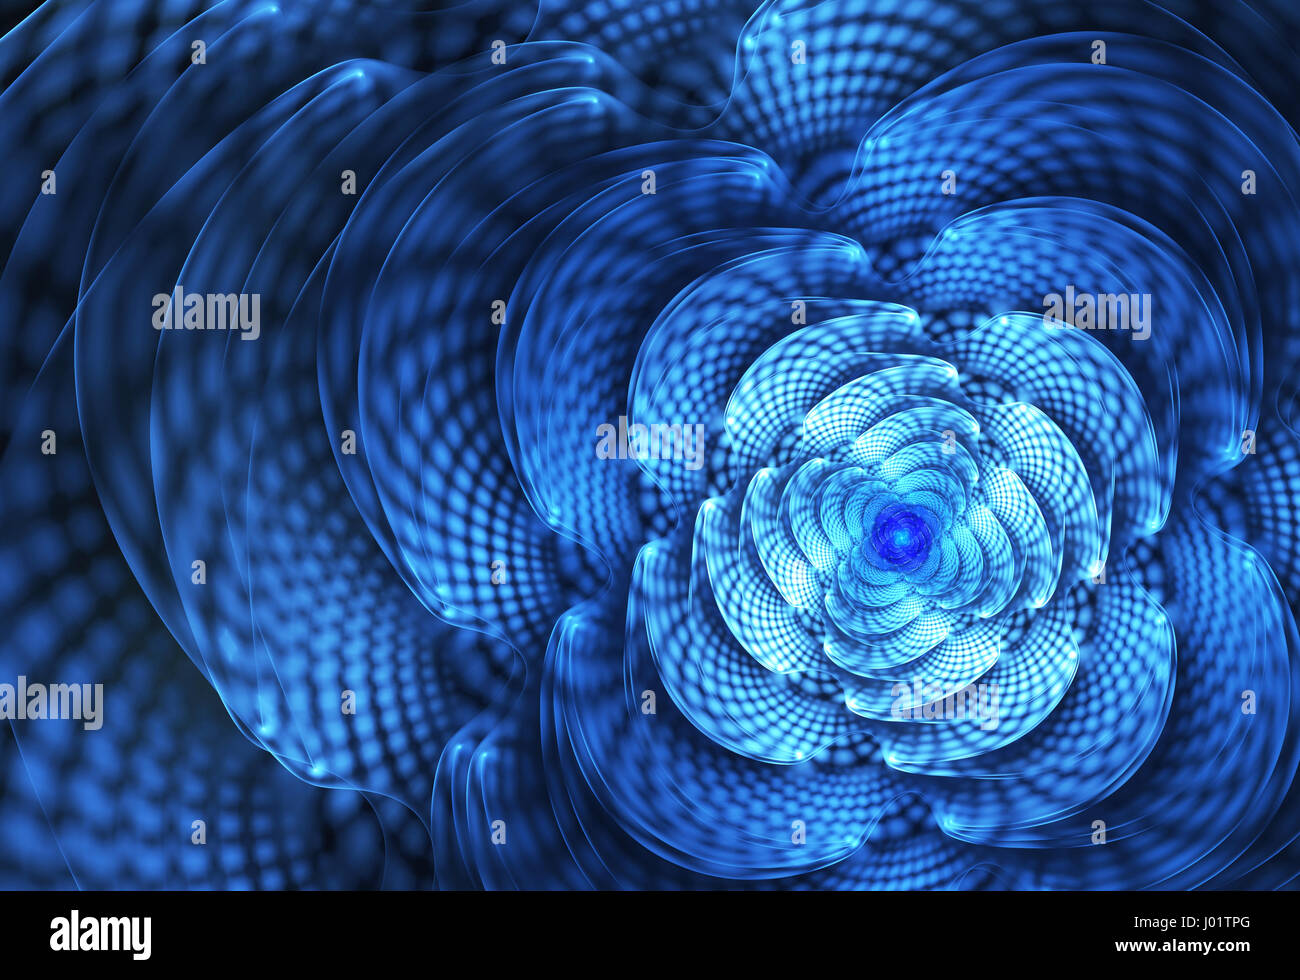 abstract fractal background, spiral, flower Stock Photo